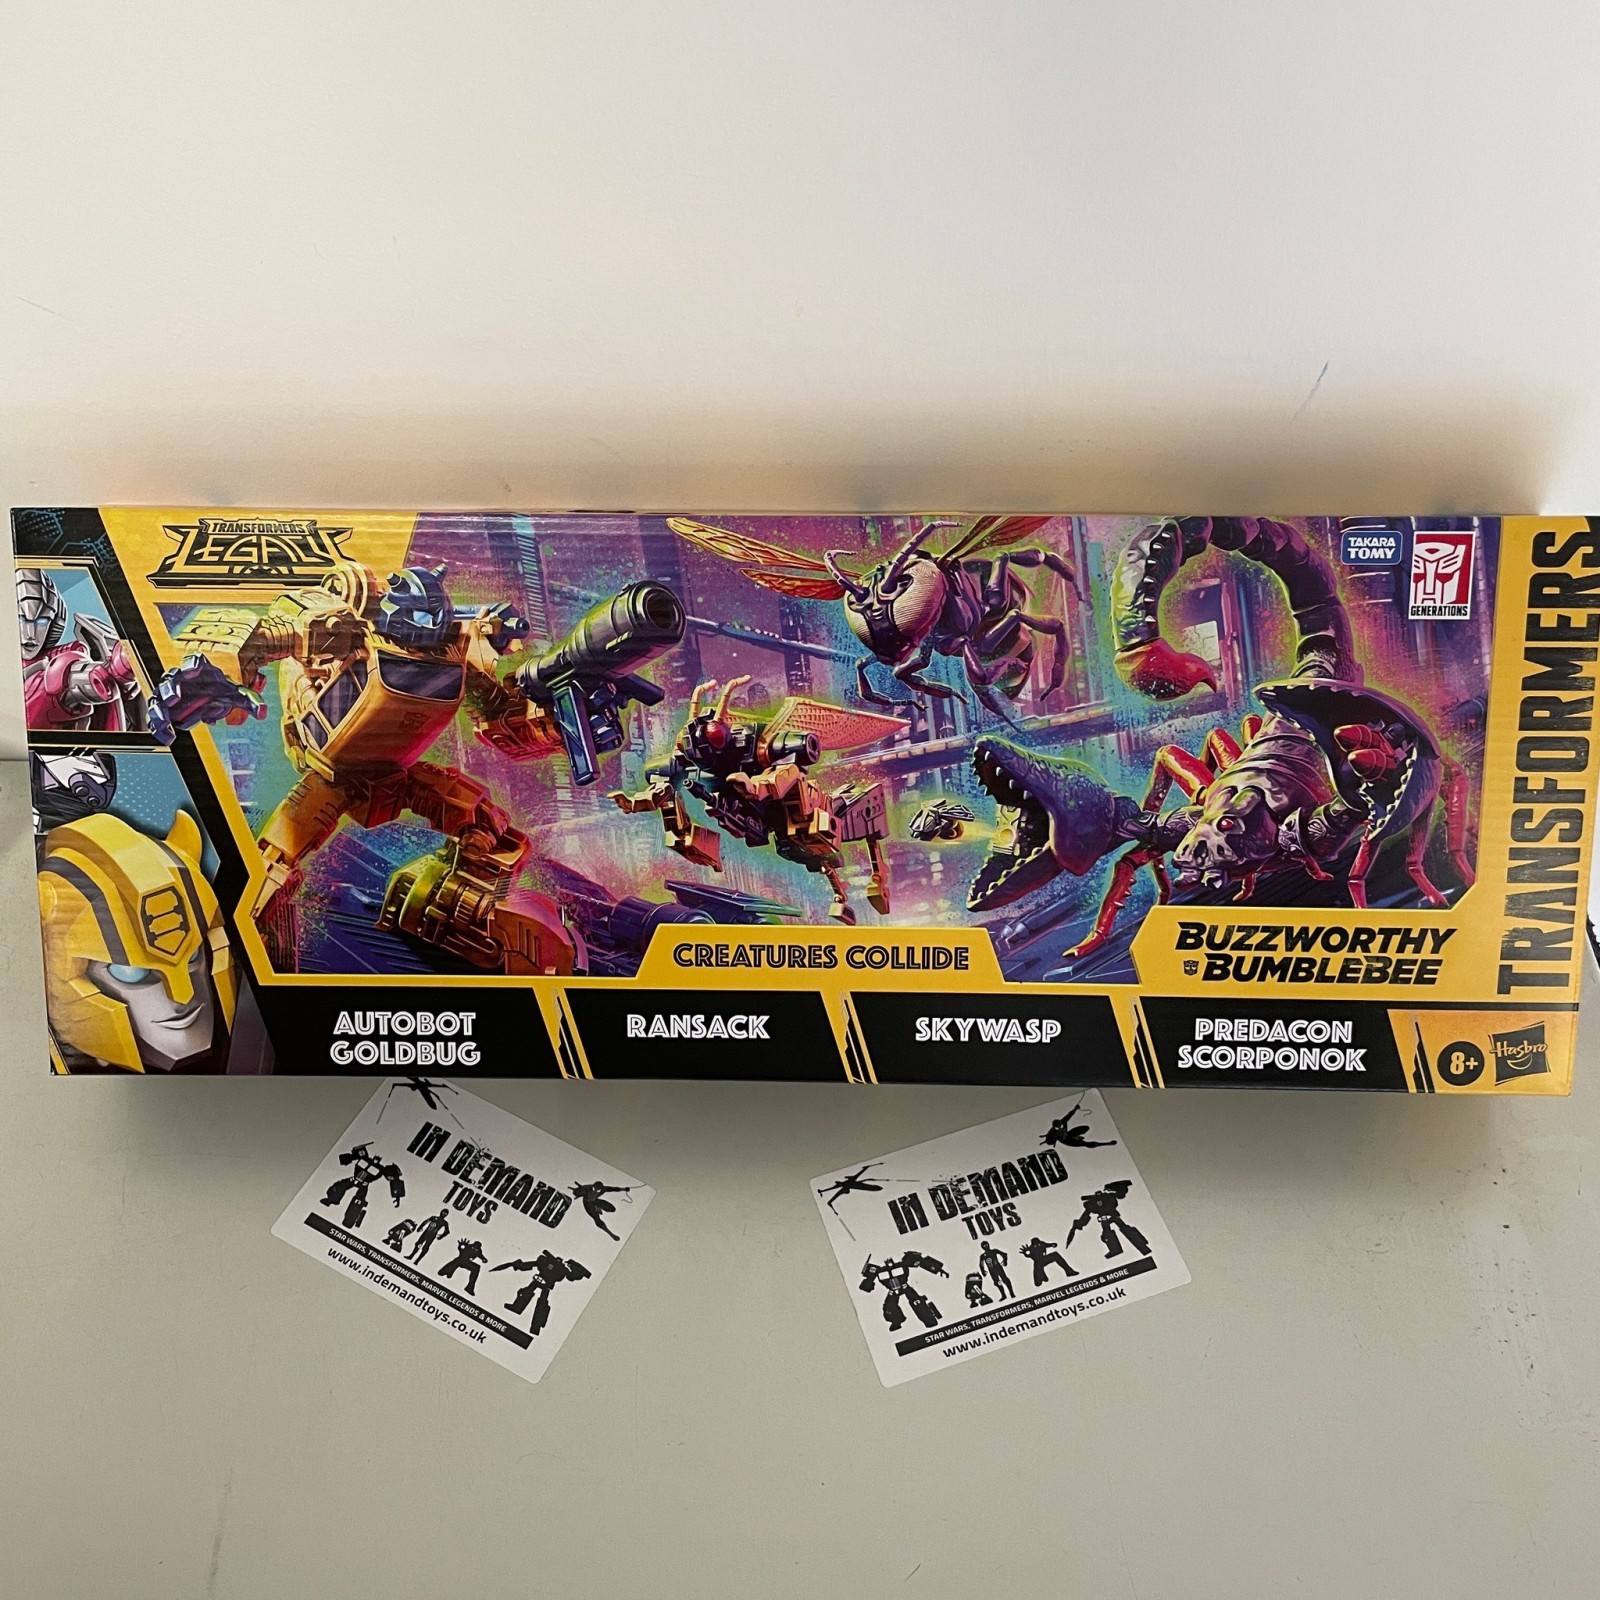 Transformers News: Transformers Buzzworthy Bumblebee Creatures Collide 4 Pack Full Revealed